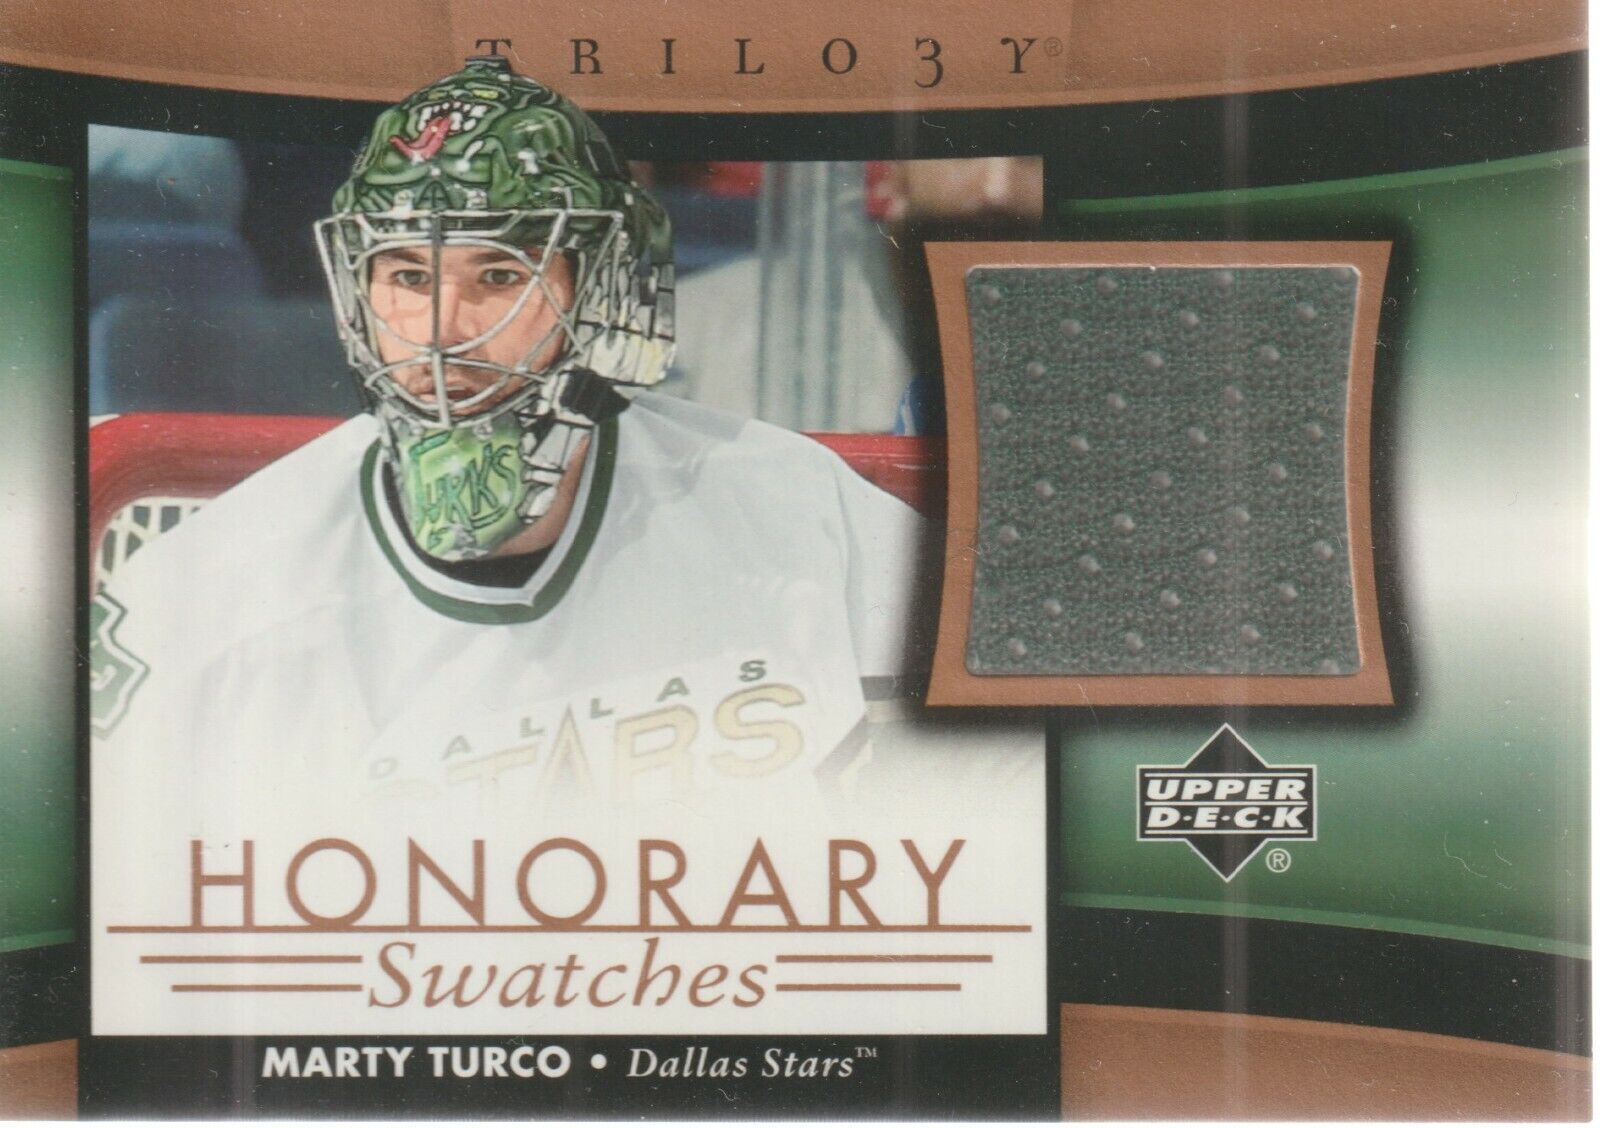 2005-06 UD Trilogy Honorary Swatches HS-MT Turco